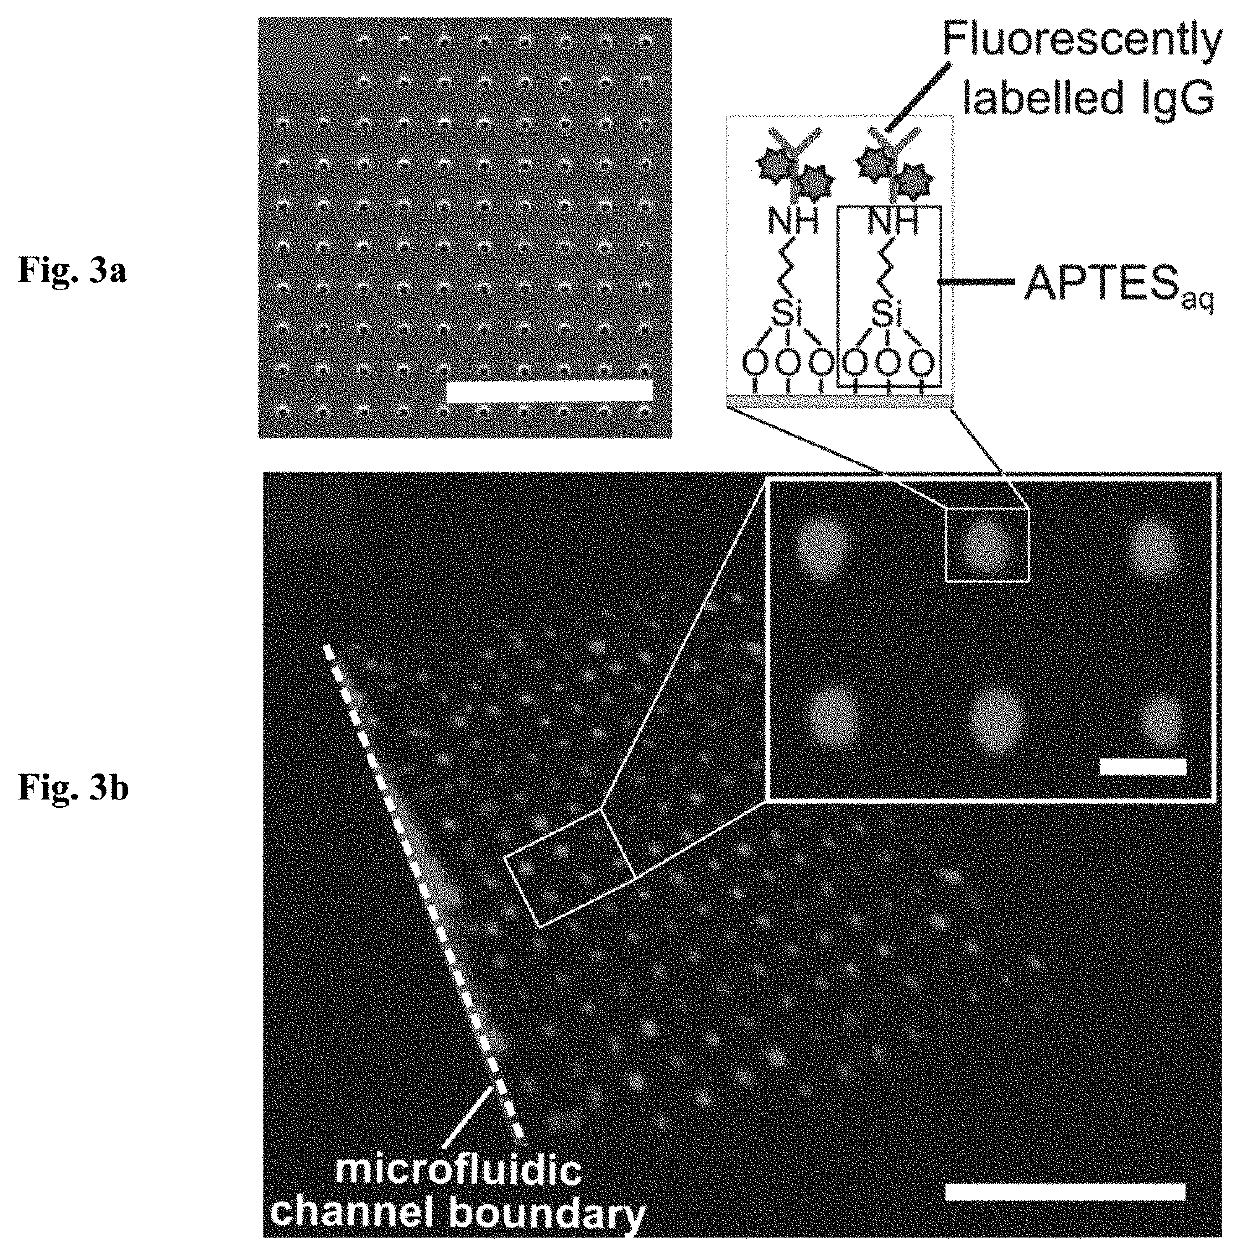 Micro- and nanocontact printing with aminosilanes: patterning surfaces of microfluidic devices for multi- plexed bioassays